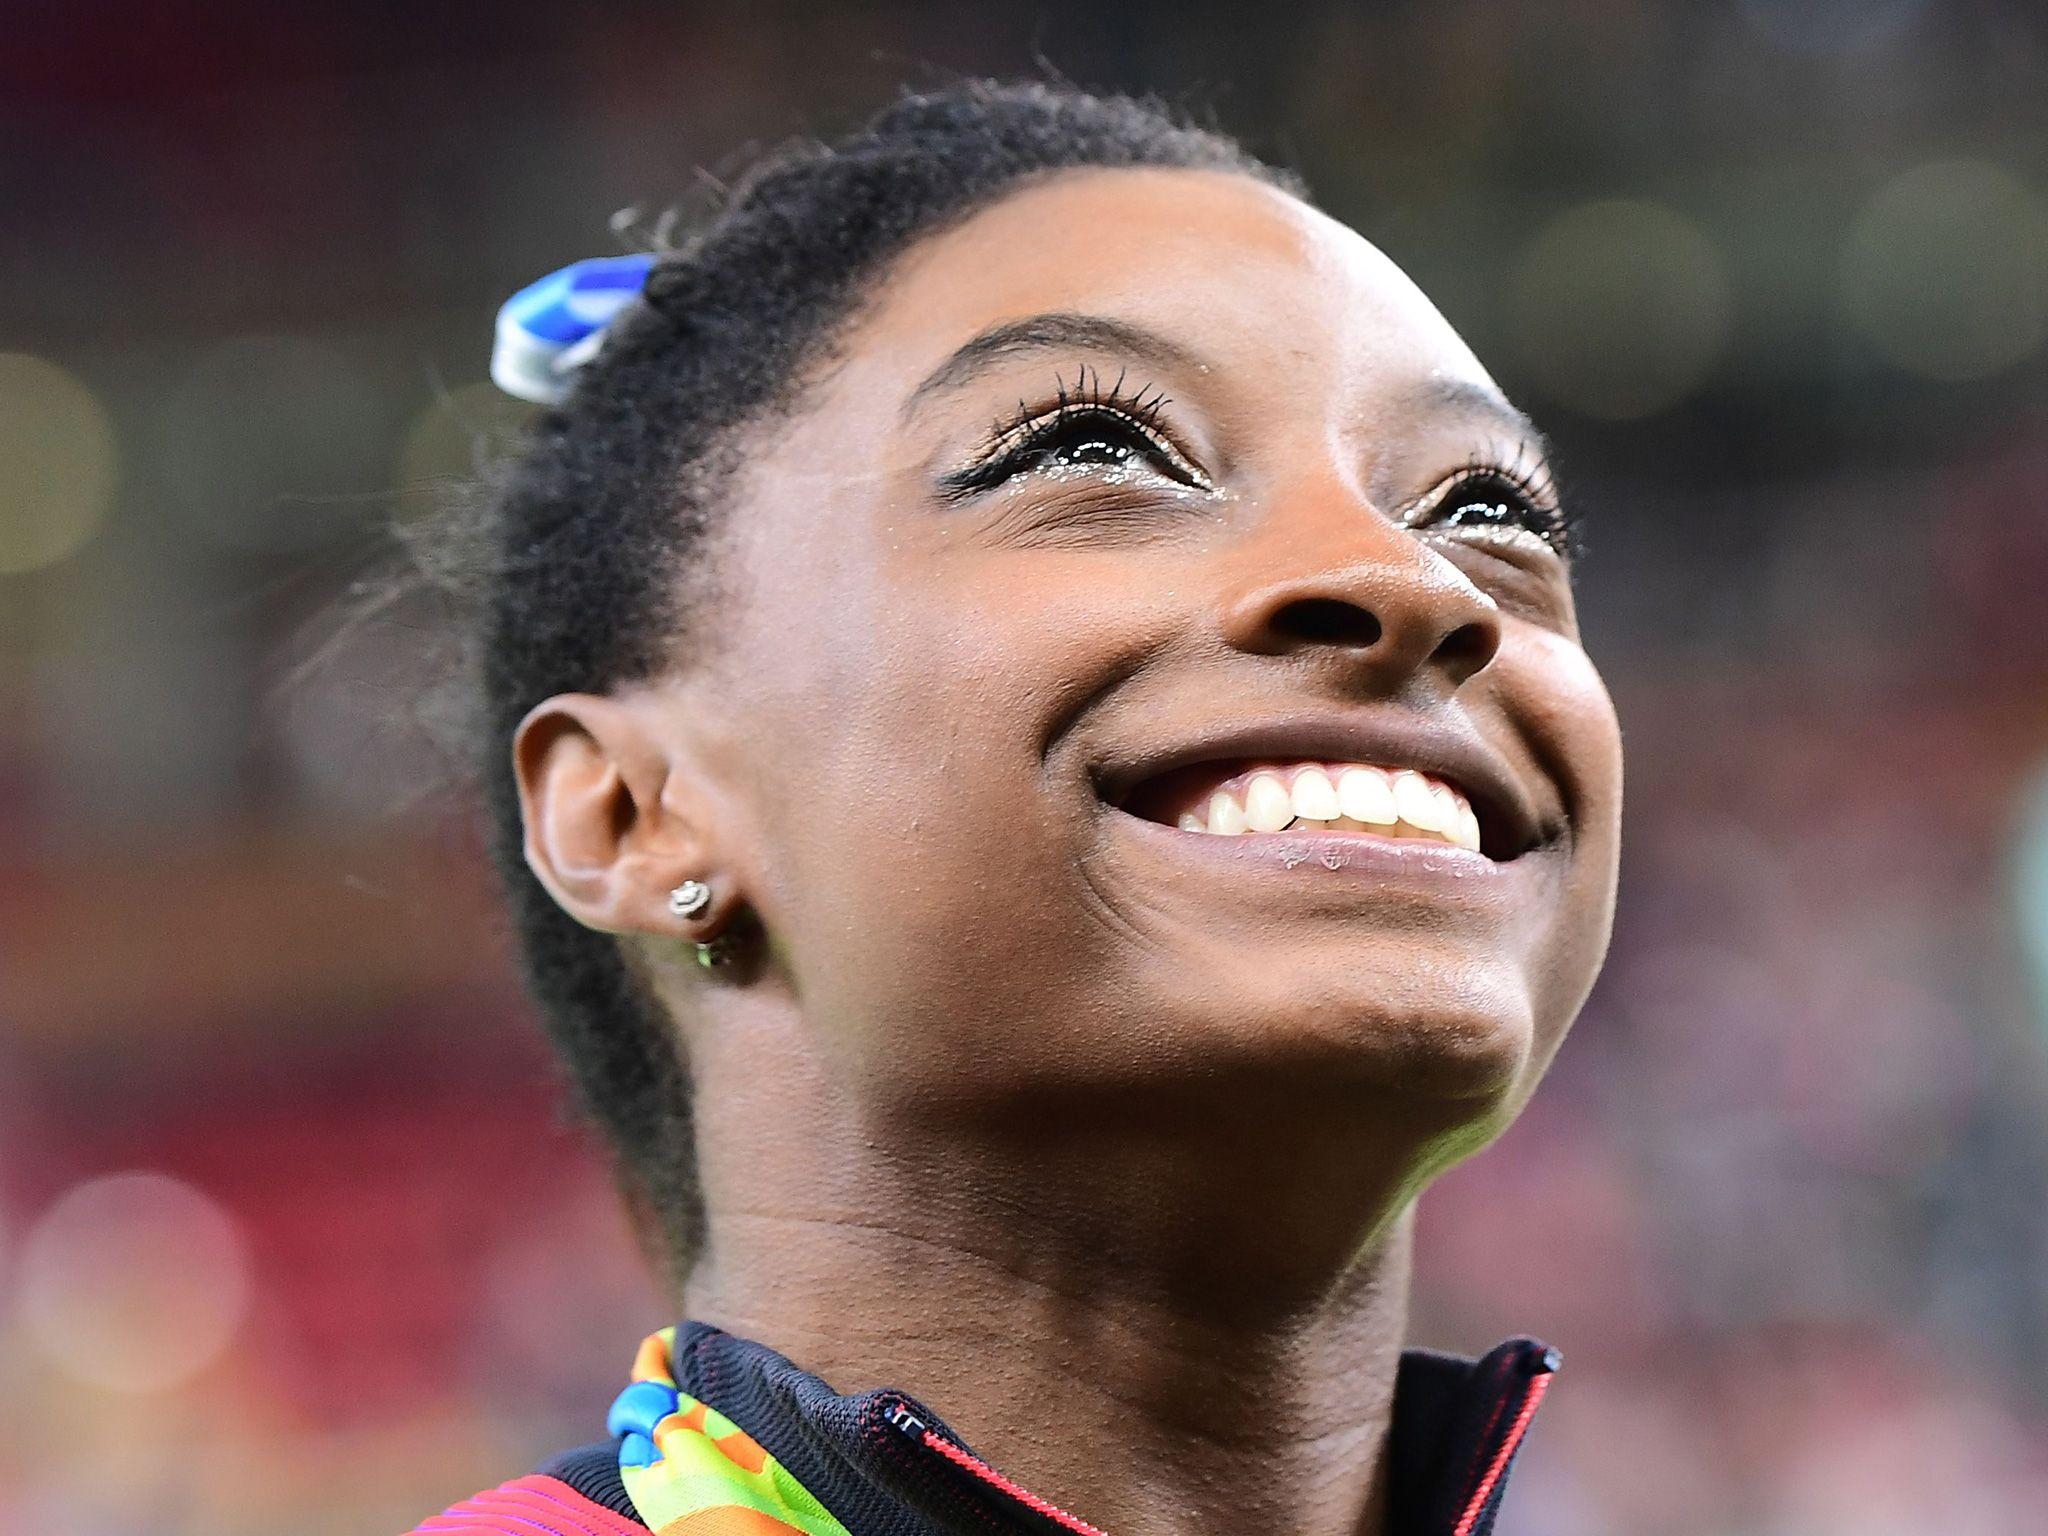 Rio 2016: Simone Biles was calming tearful mother down before gold